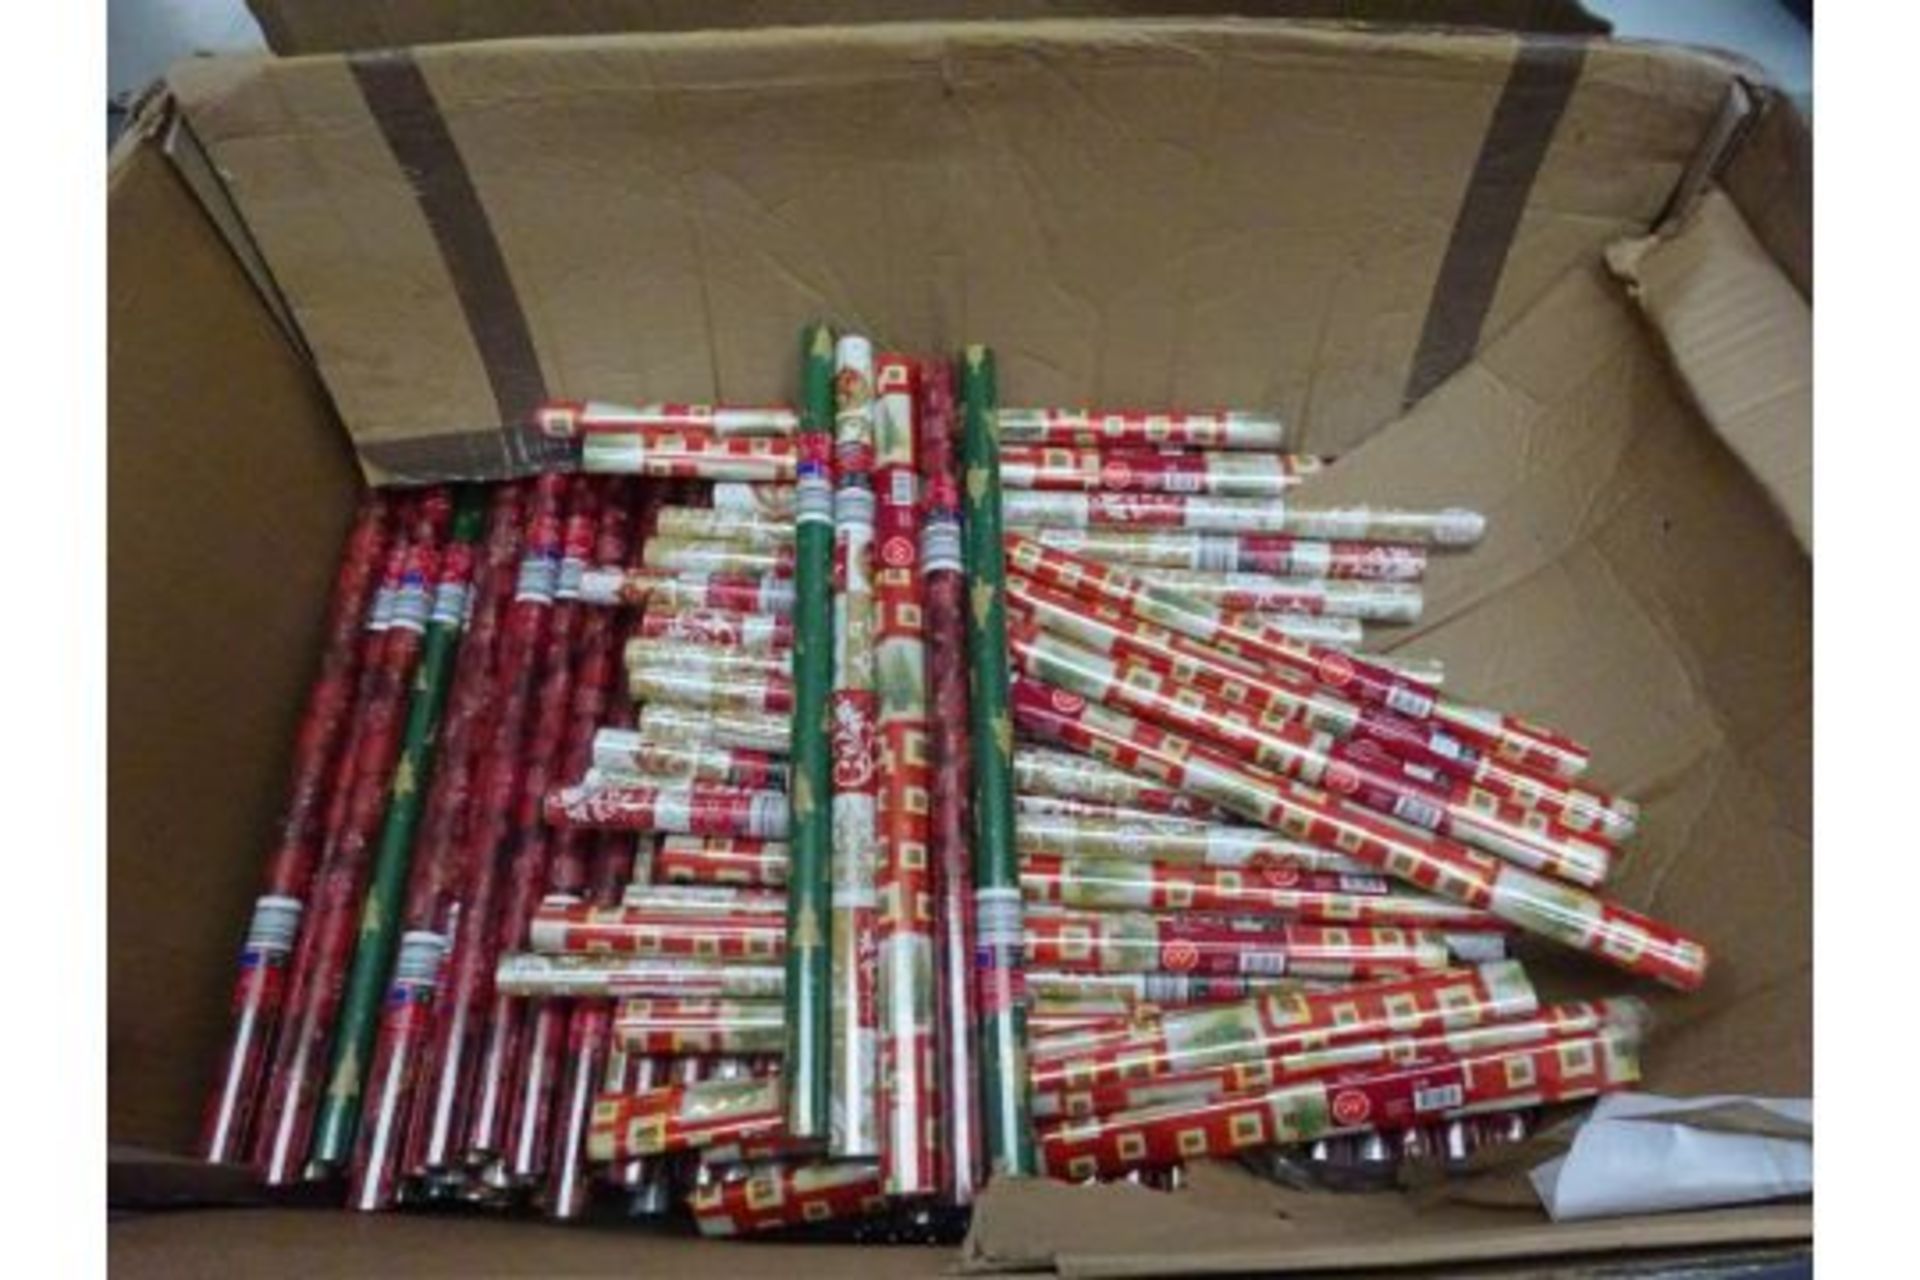 x5 Rolls Of Christmas Wrapping Paper (various designs) - RRP 99p Each Roll